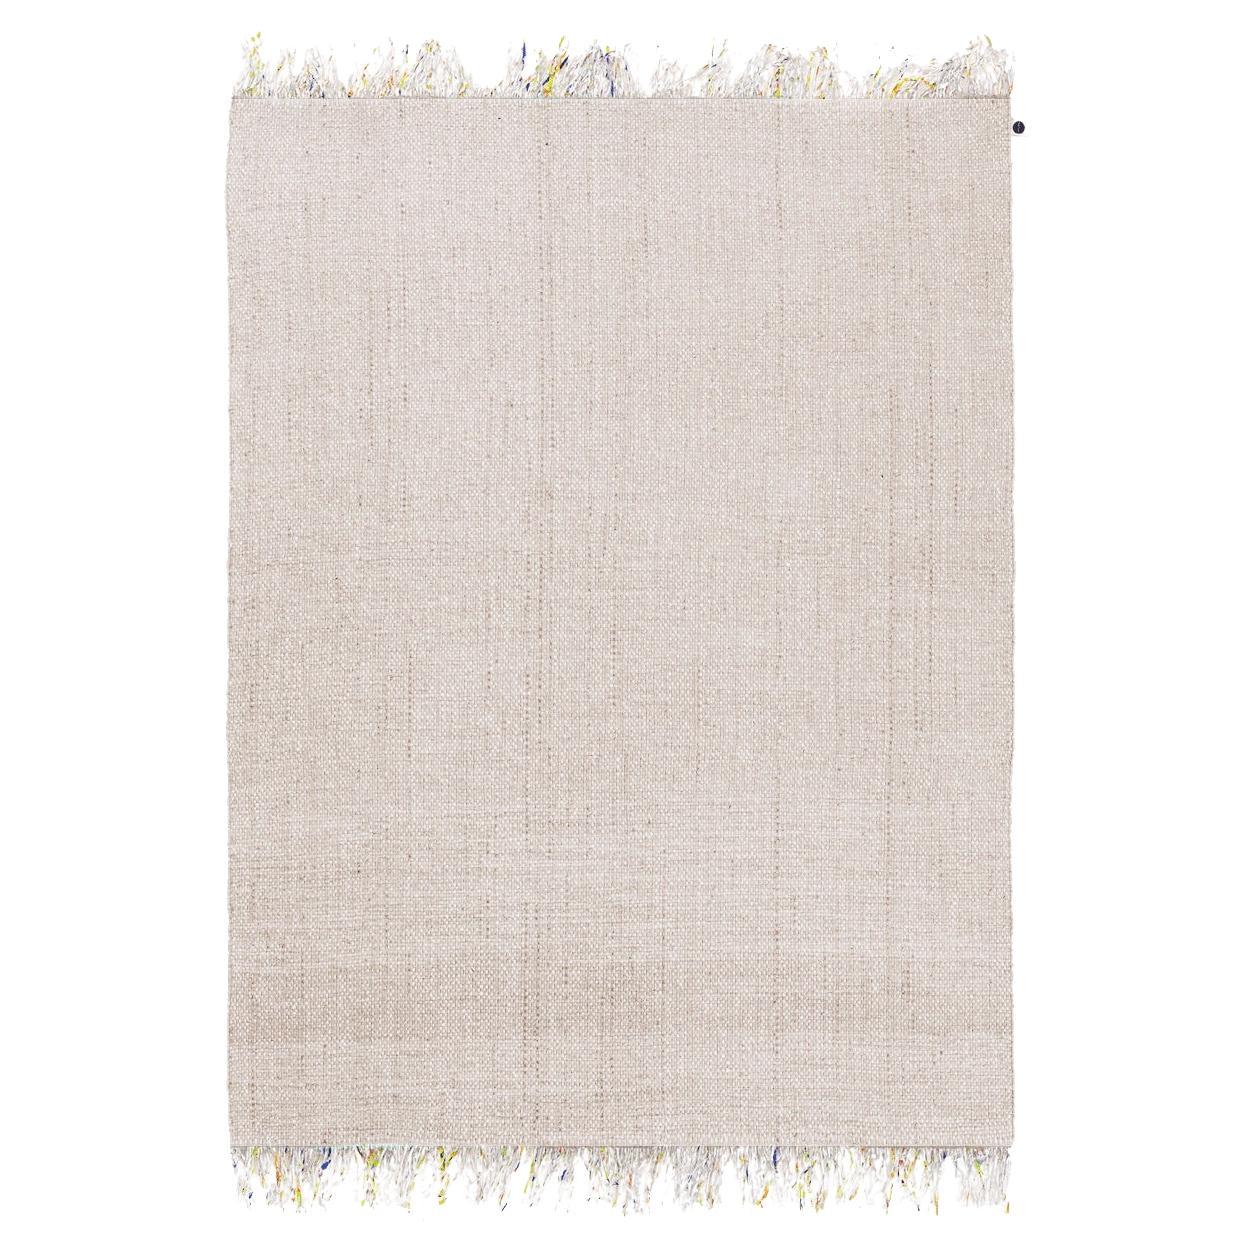 Candy Wrapper Rug_Dining_white sand / Award Winning Woven Rug by Jutta Werner